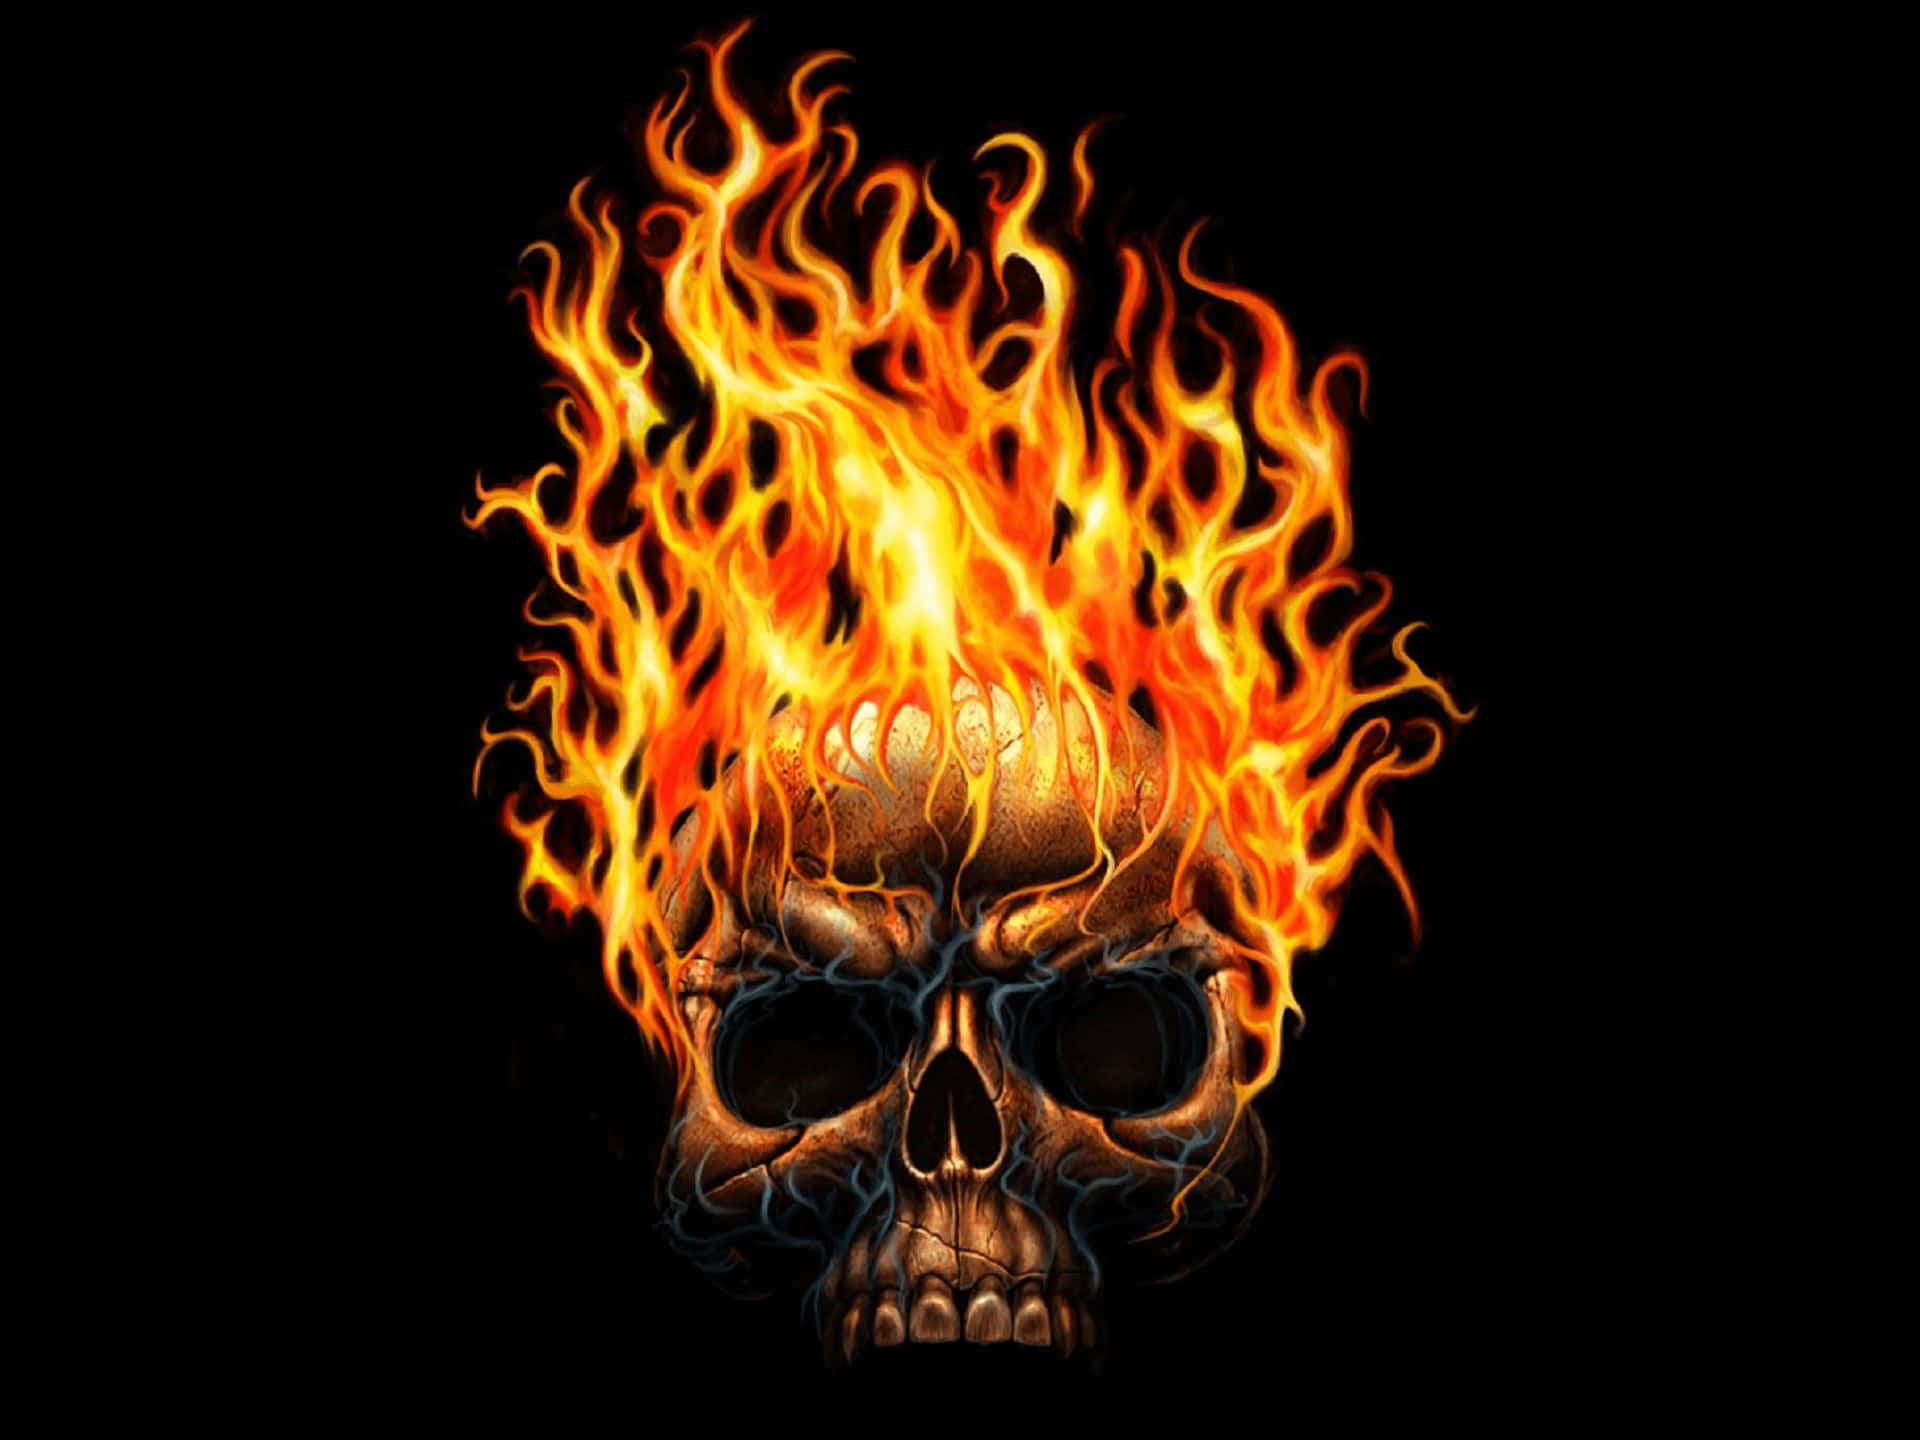 Show fear to the Flaming Skull Wallpaper